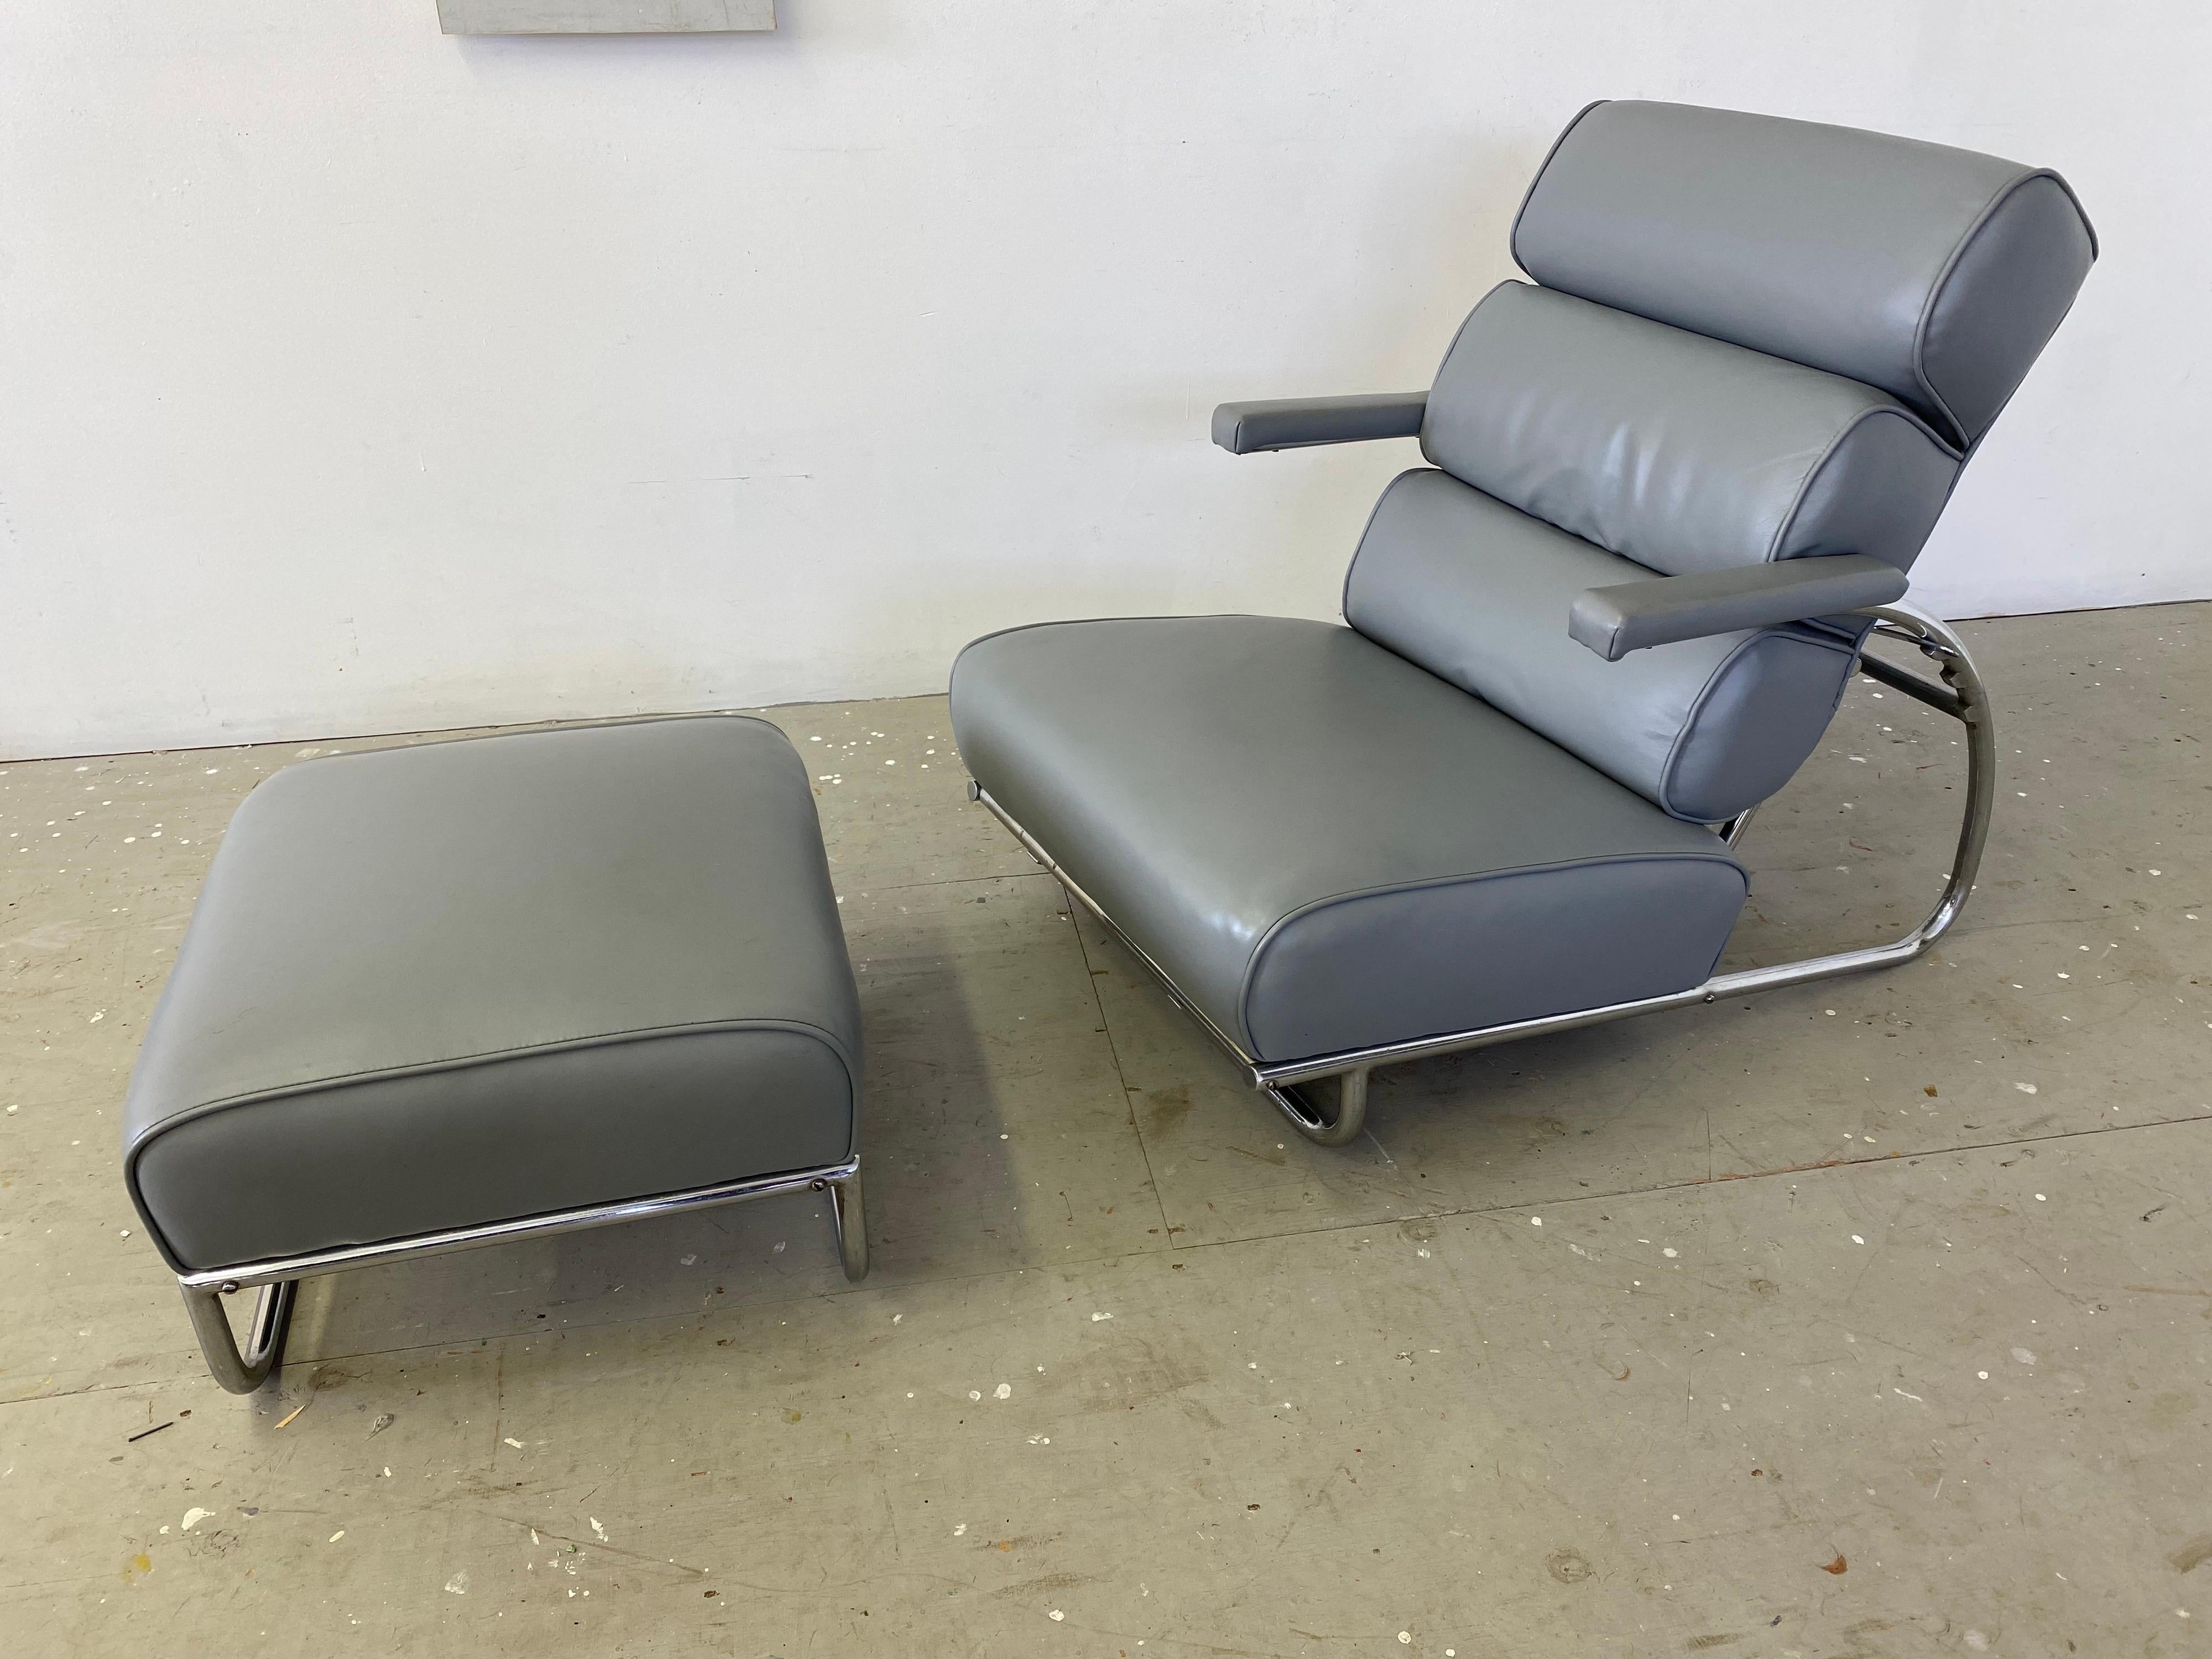 Gilbert Rohde for Troy Sunshade Chrome and Leather 3 Position Lounge Chair. Rohde did some of his most amazing designs for Troy Sunshade. Designed in 1934 this early example, later models had more joints and screws that were attached. This early one